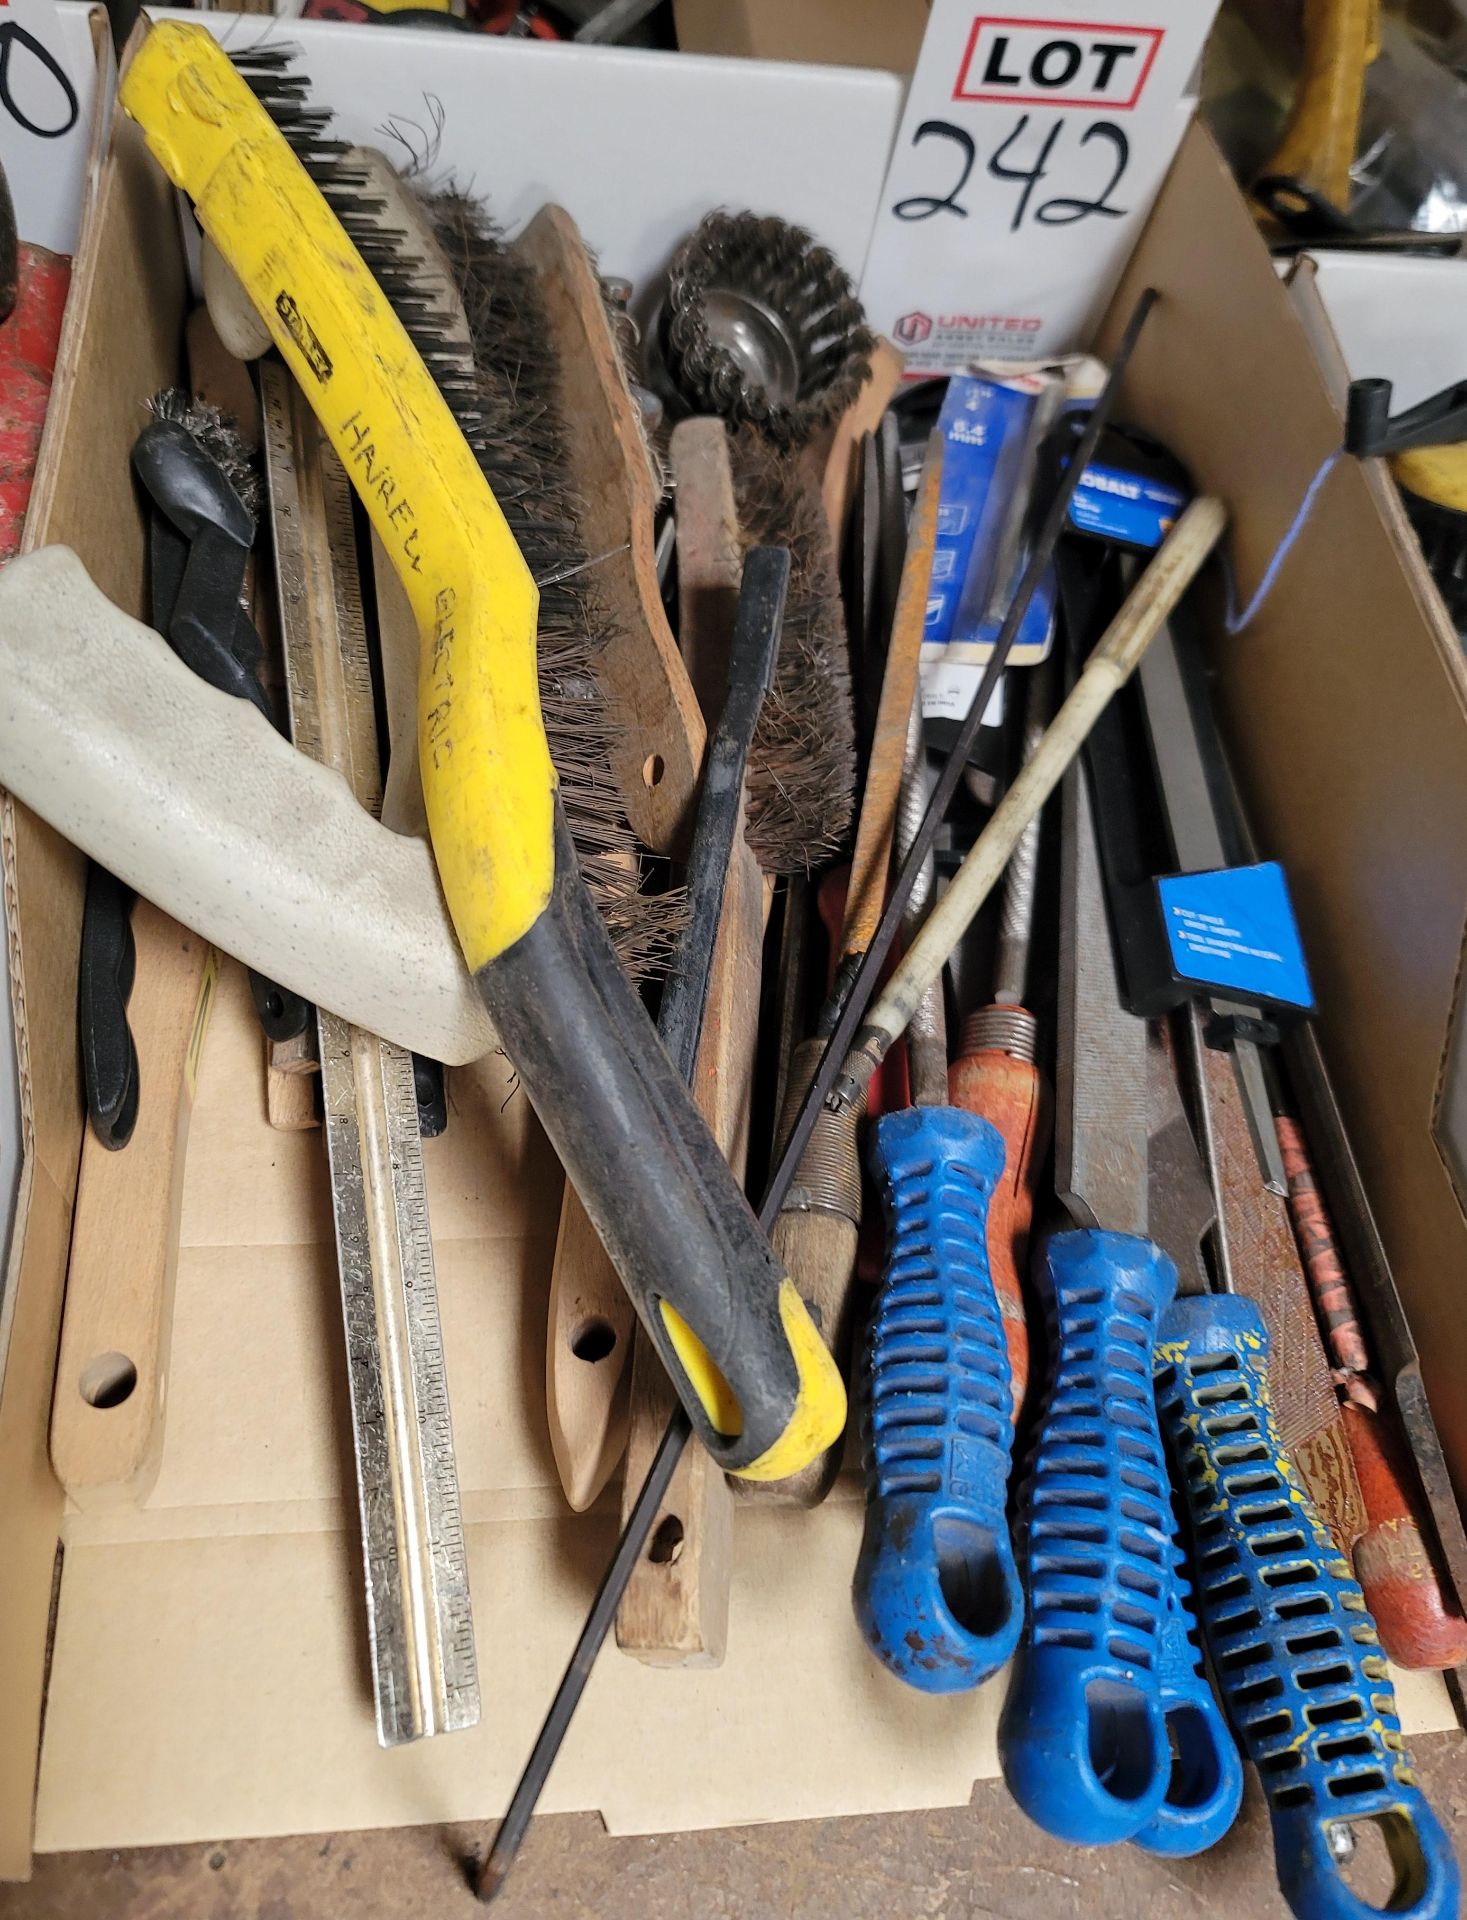 LOT - FILES AND WIRE BRUSHES